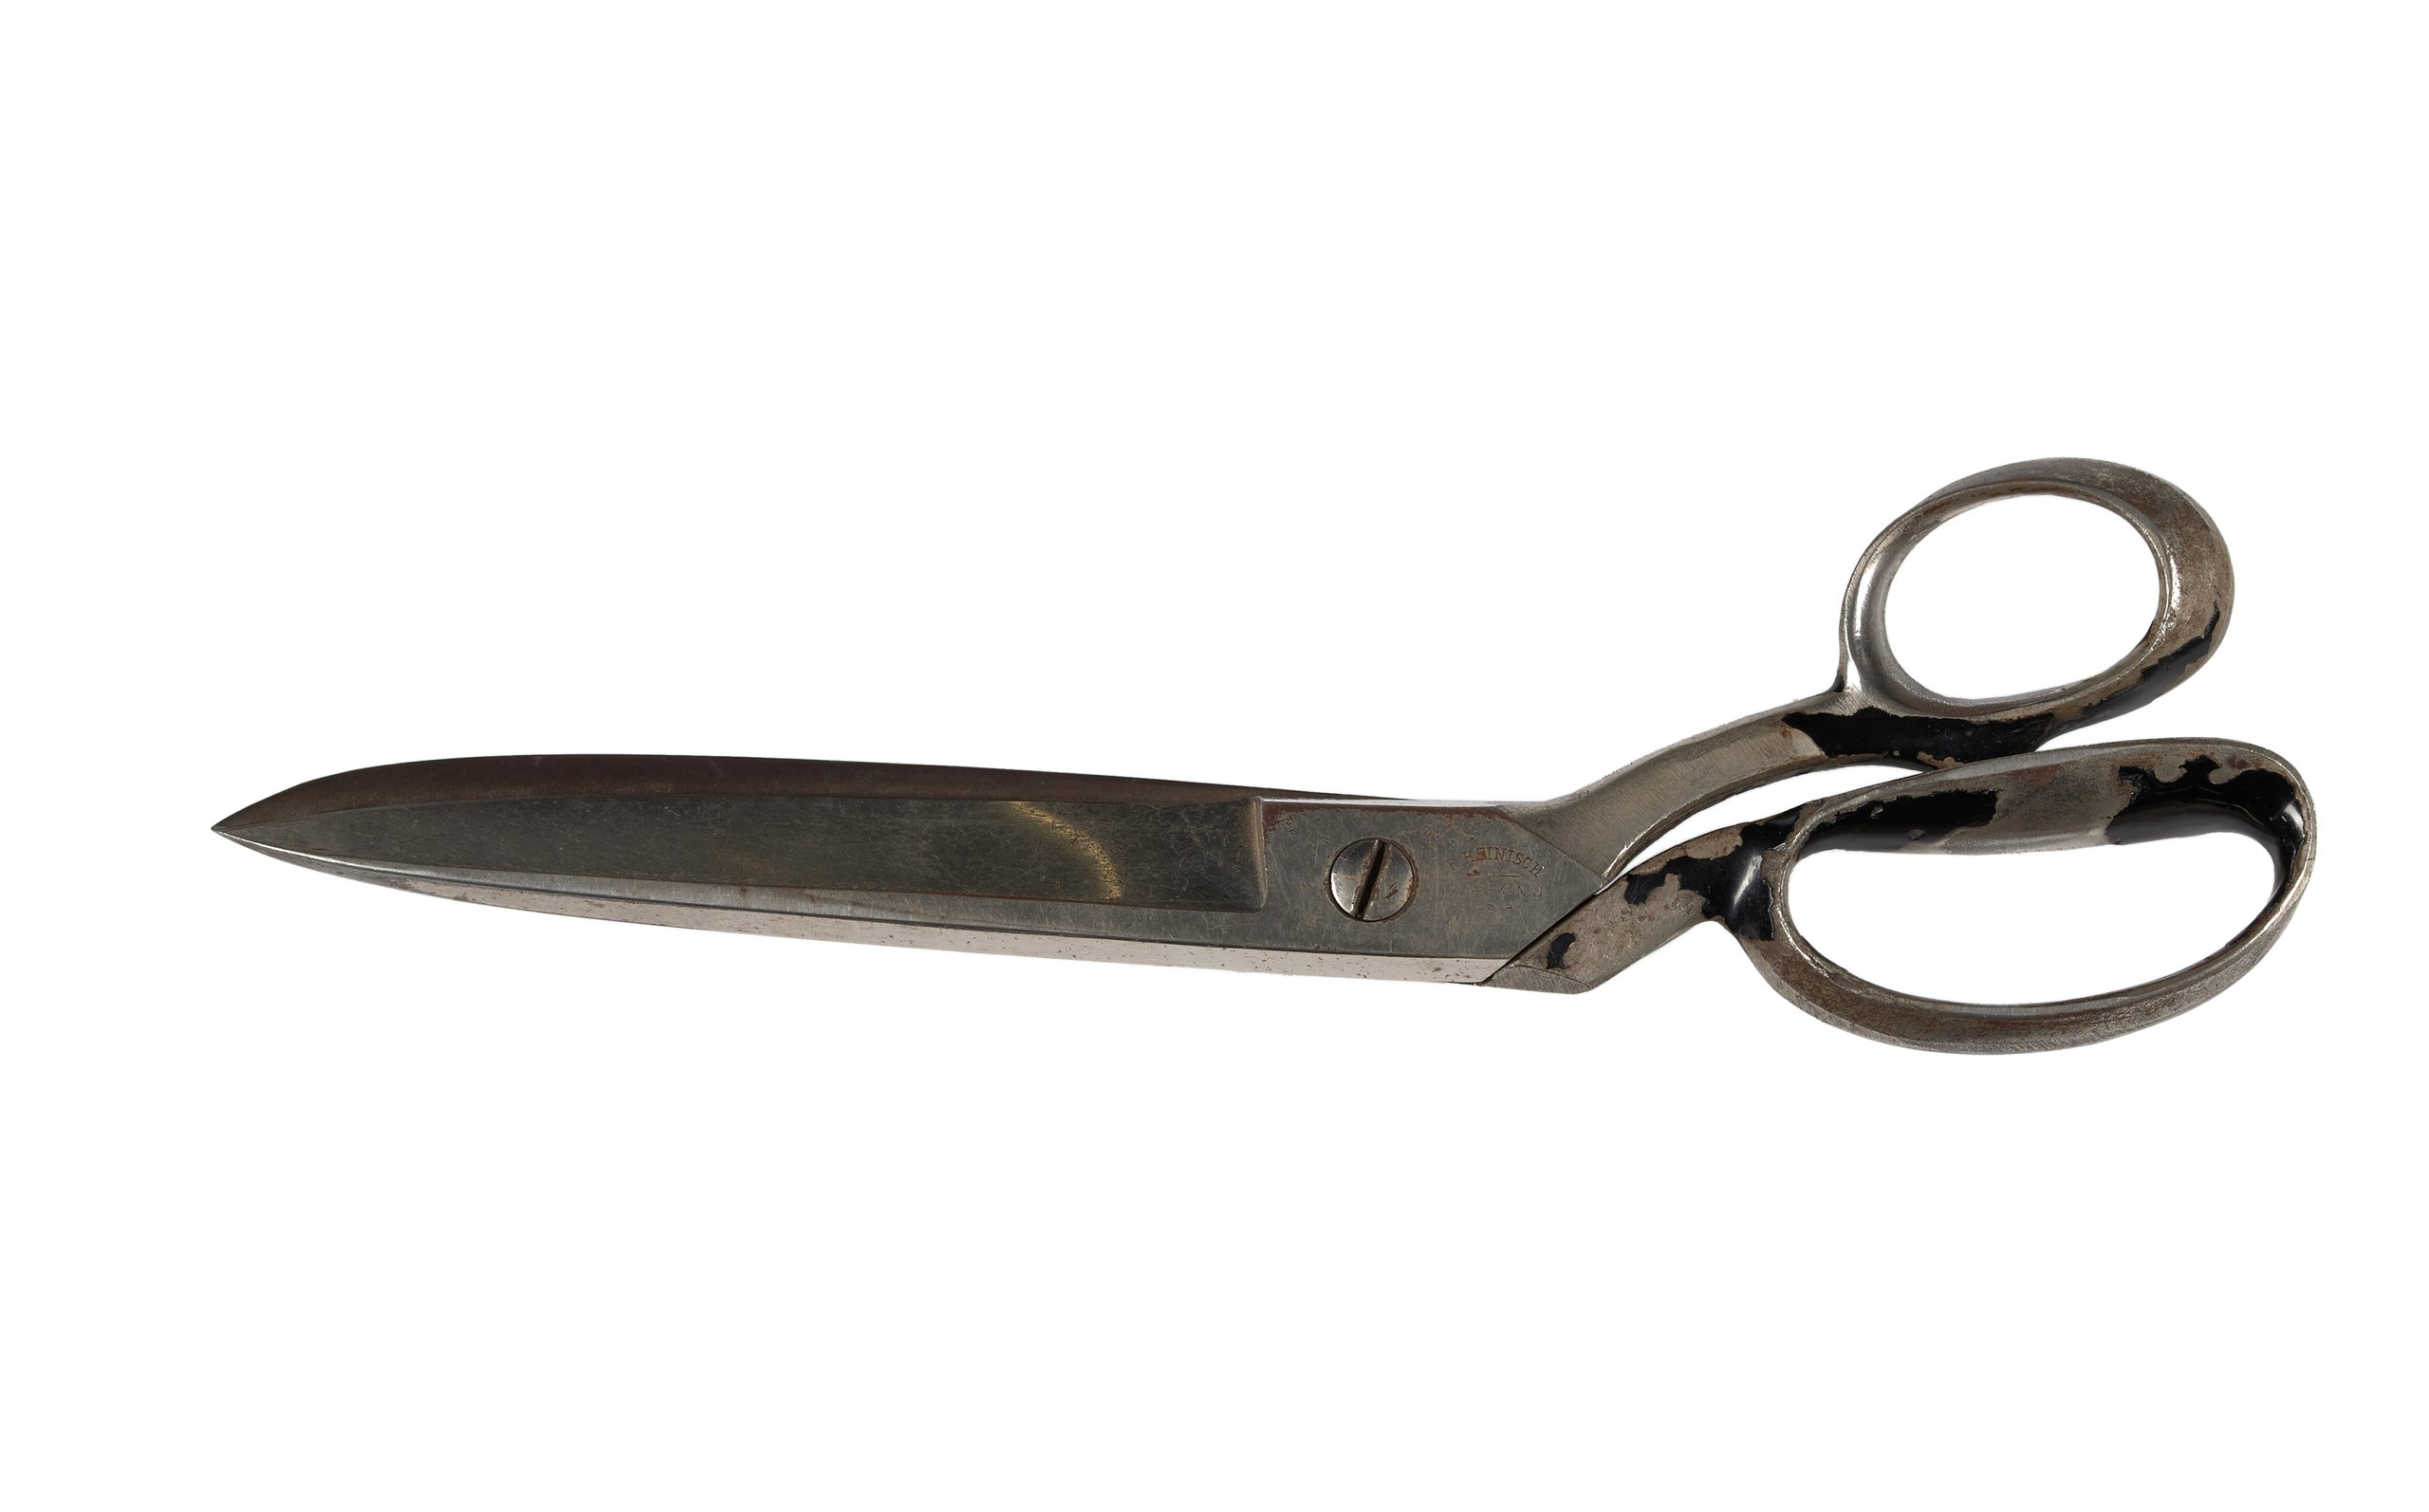 Scissors used by Ron Gillman